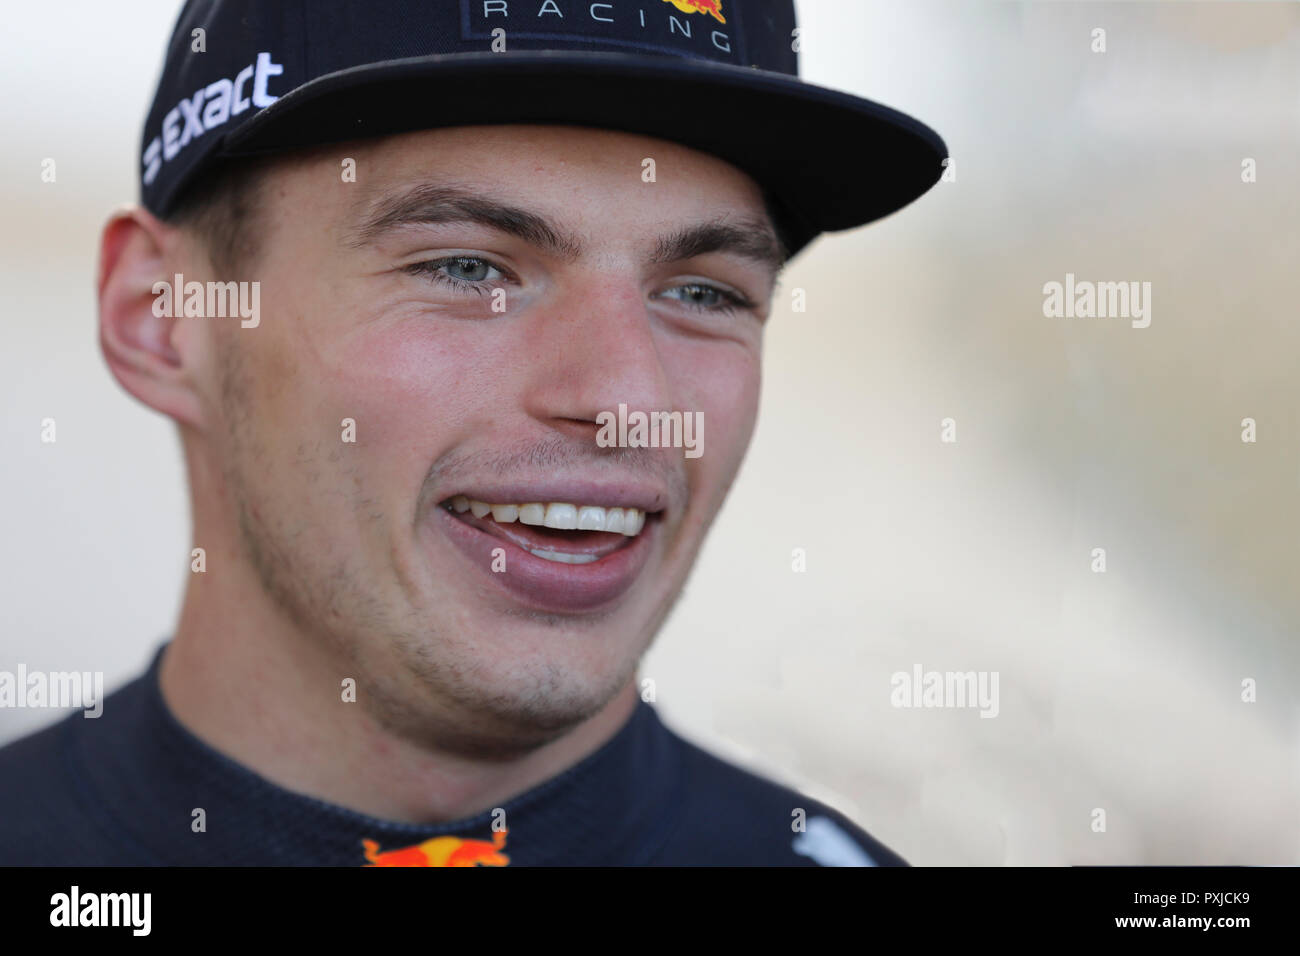 Candid portrait of Max Verstappen, Formula One driver during an interview after the Formula One race in Austin. Texas. Stock Photo